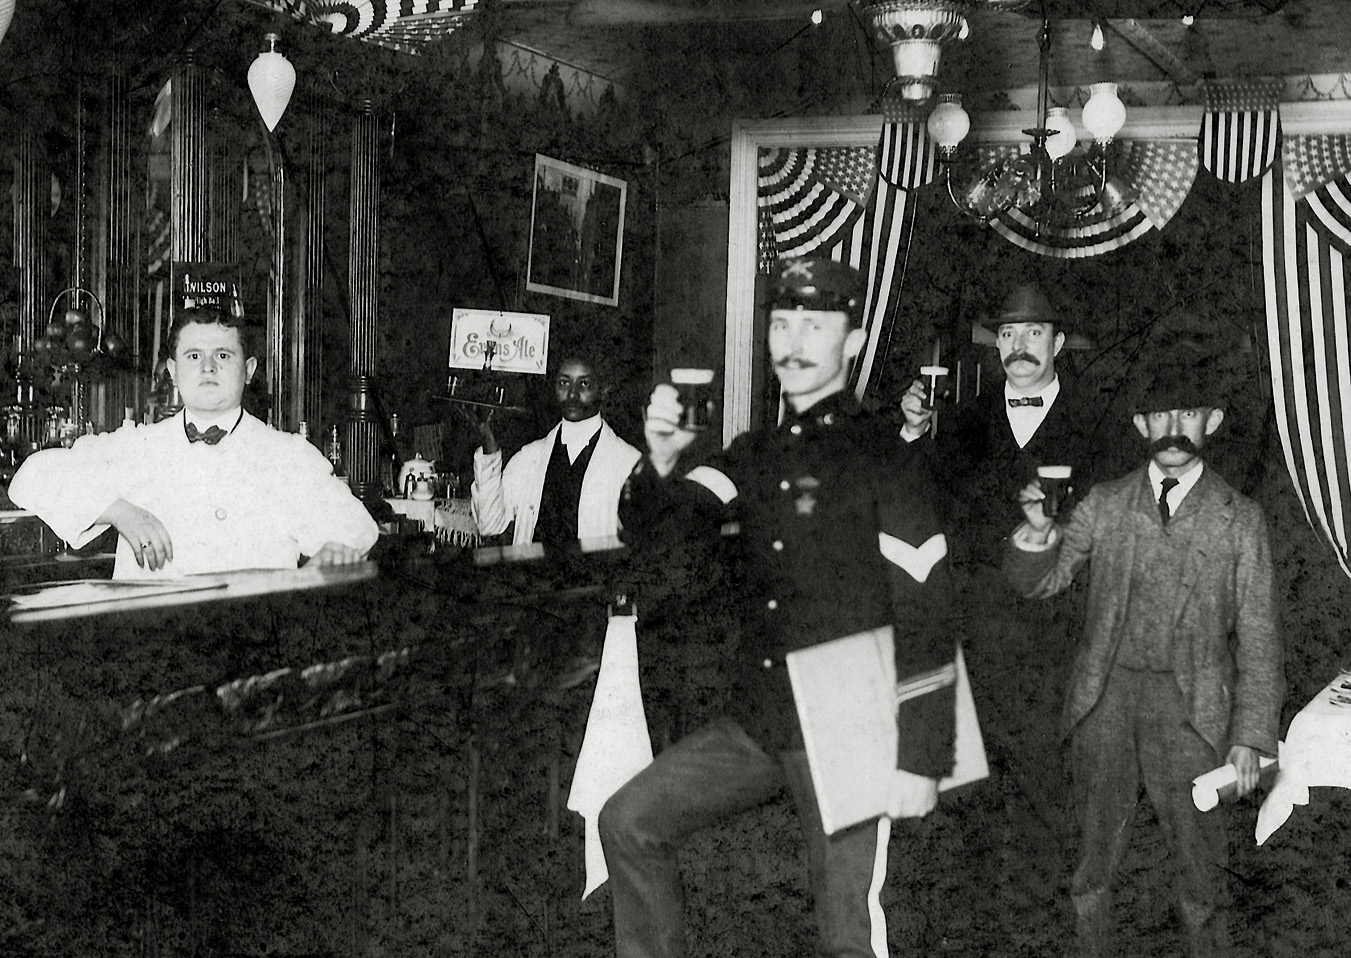 My father's Uncle, August Kappeler, born in Switzerland, who was a cavalry member of Teddy Roosevelt's Rough Riders.  Wonder what they were celebrating.  Don't have a clue as to the identities of the characters in the background or where the bar was. View full size.